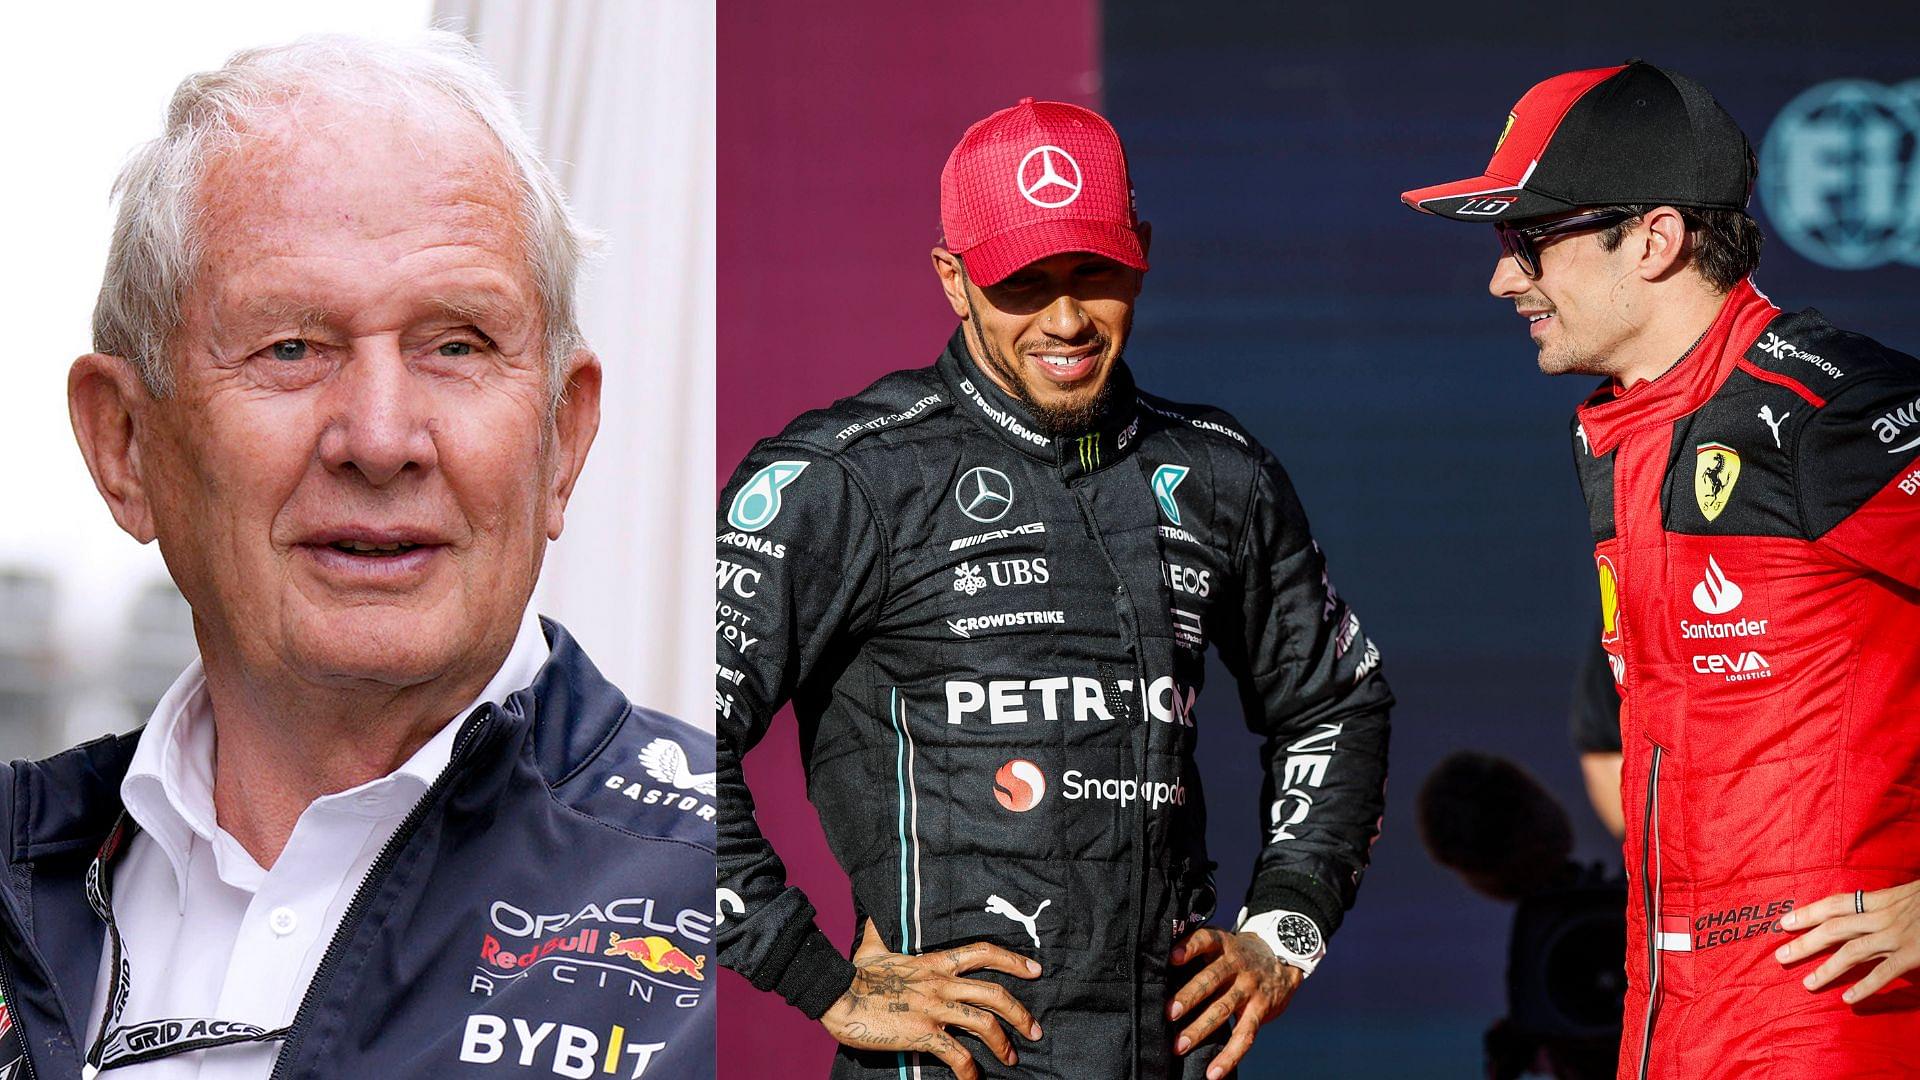 Helmut Marko Picks Lewis Hamilton as His “Horse” to Bet on Over Charles Leclerc at Ferrari